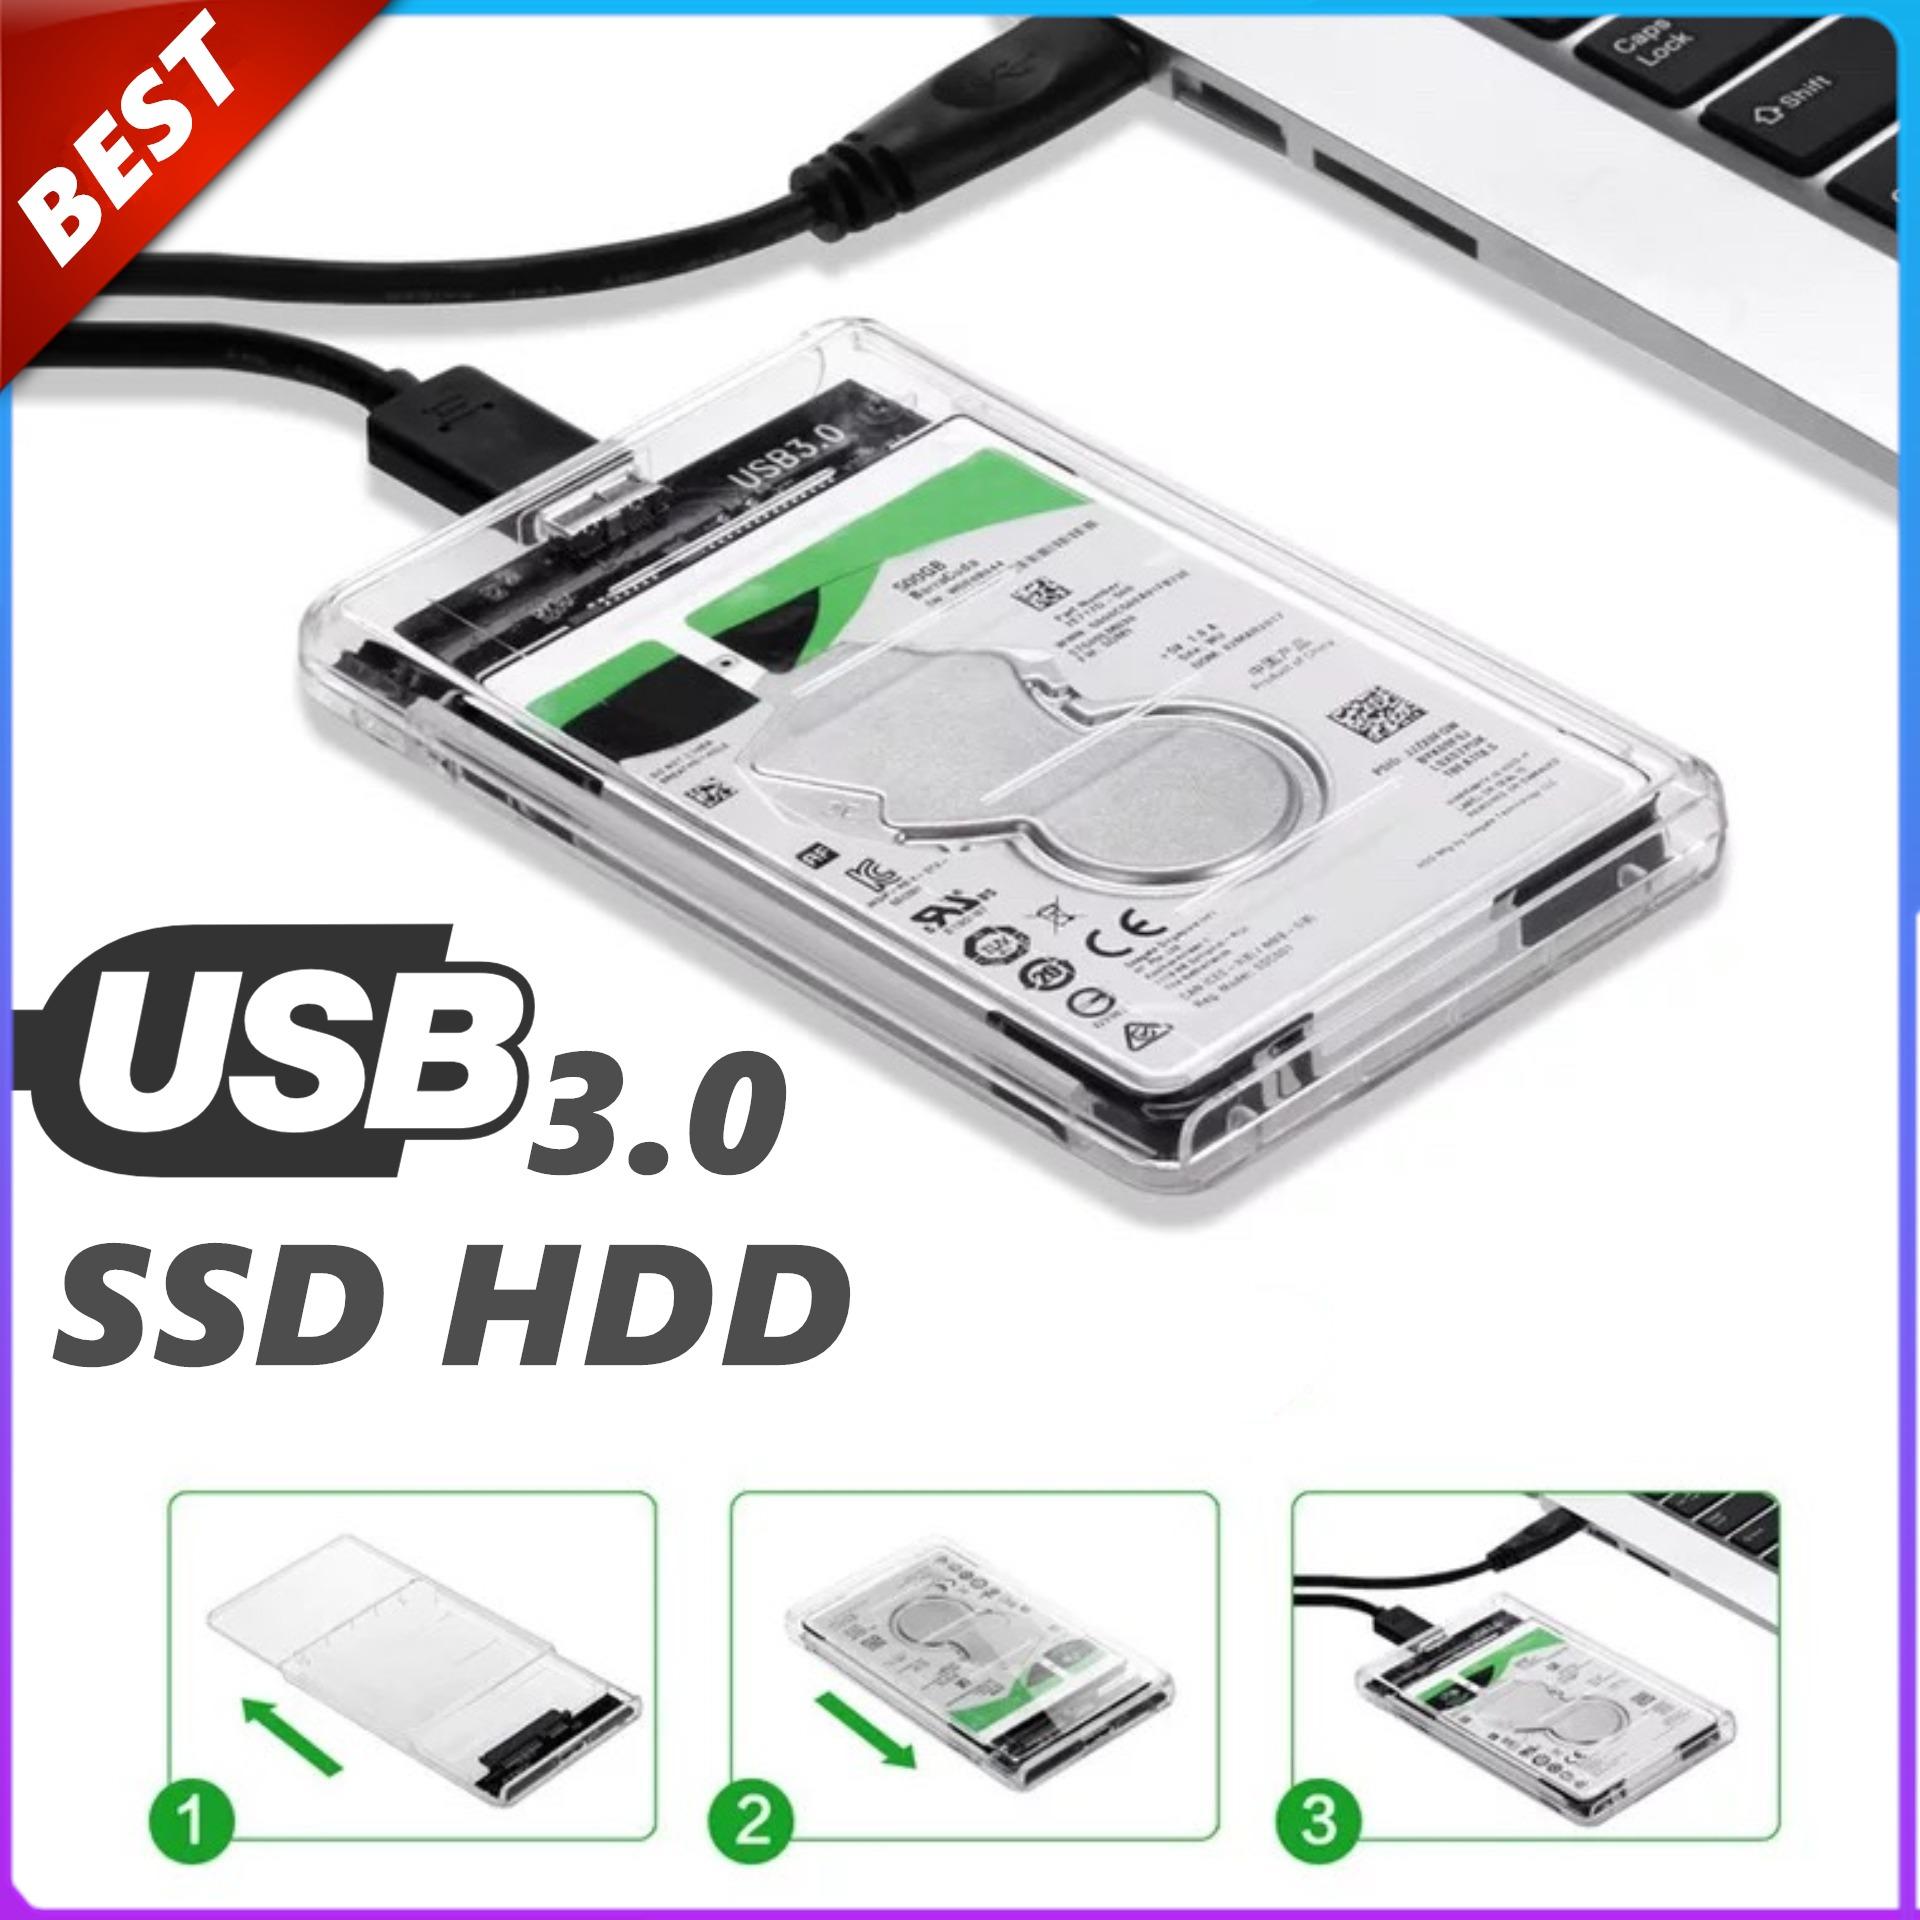 E-yield USB3.0 to SATA3.0 External Hard Drive Enclosure Hard Disk Storage Box with SATA to USB Connector Cable Support UASP for 2.5inches(2.5 นิ้ว) HDD ฮาร์ดดิส and SSD SATA Interface External Gard Drive Clear with fast And Good Quality Hard Drive Disk